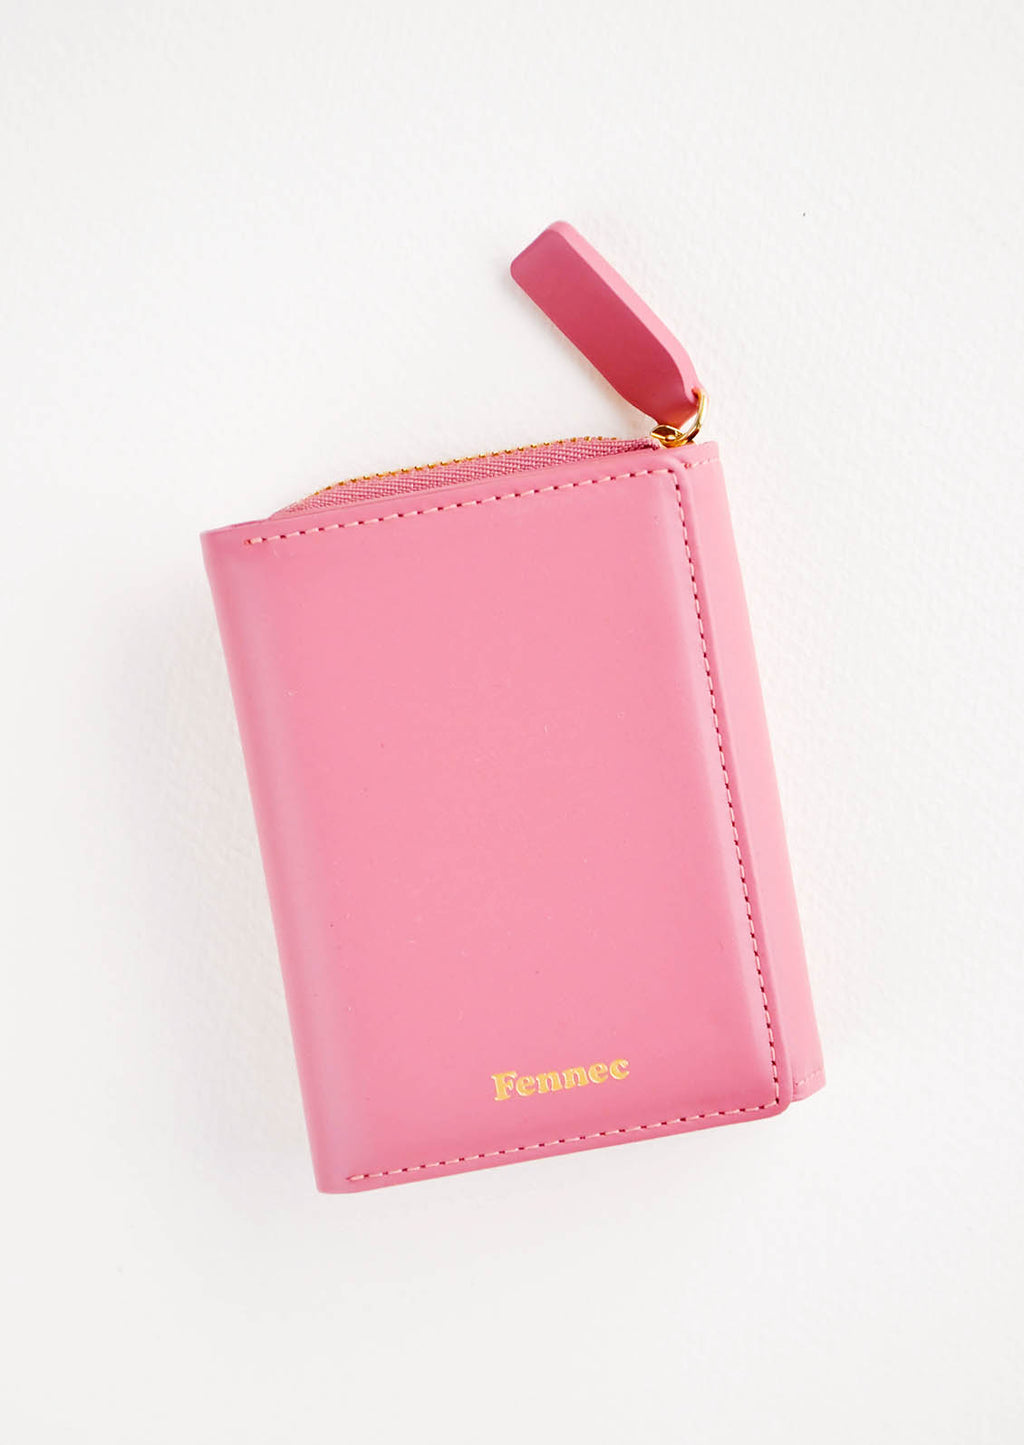 Rose: Rose red leather wallet that zips on three sides, in a closed position, with matching tab pull.